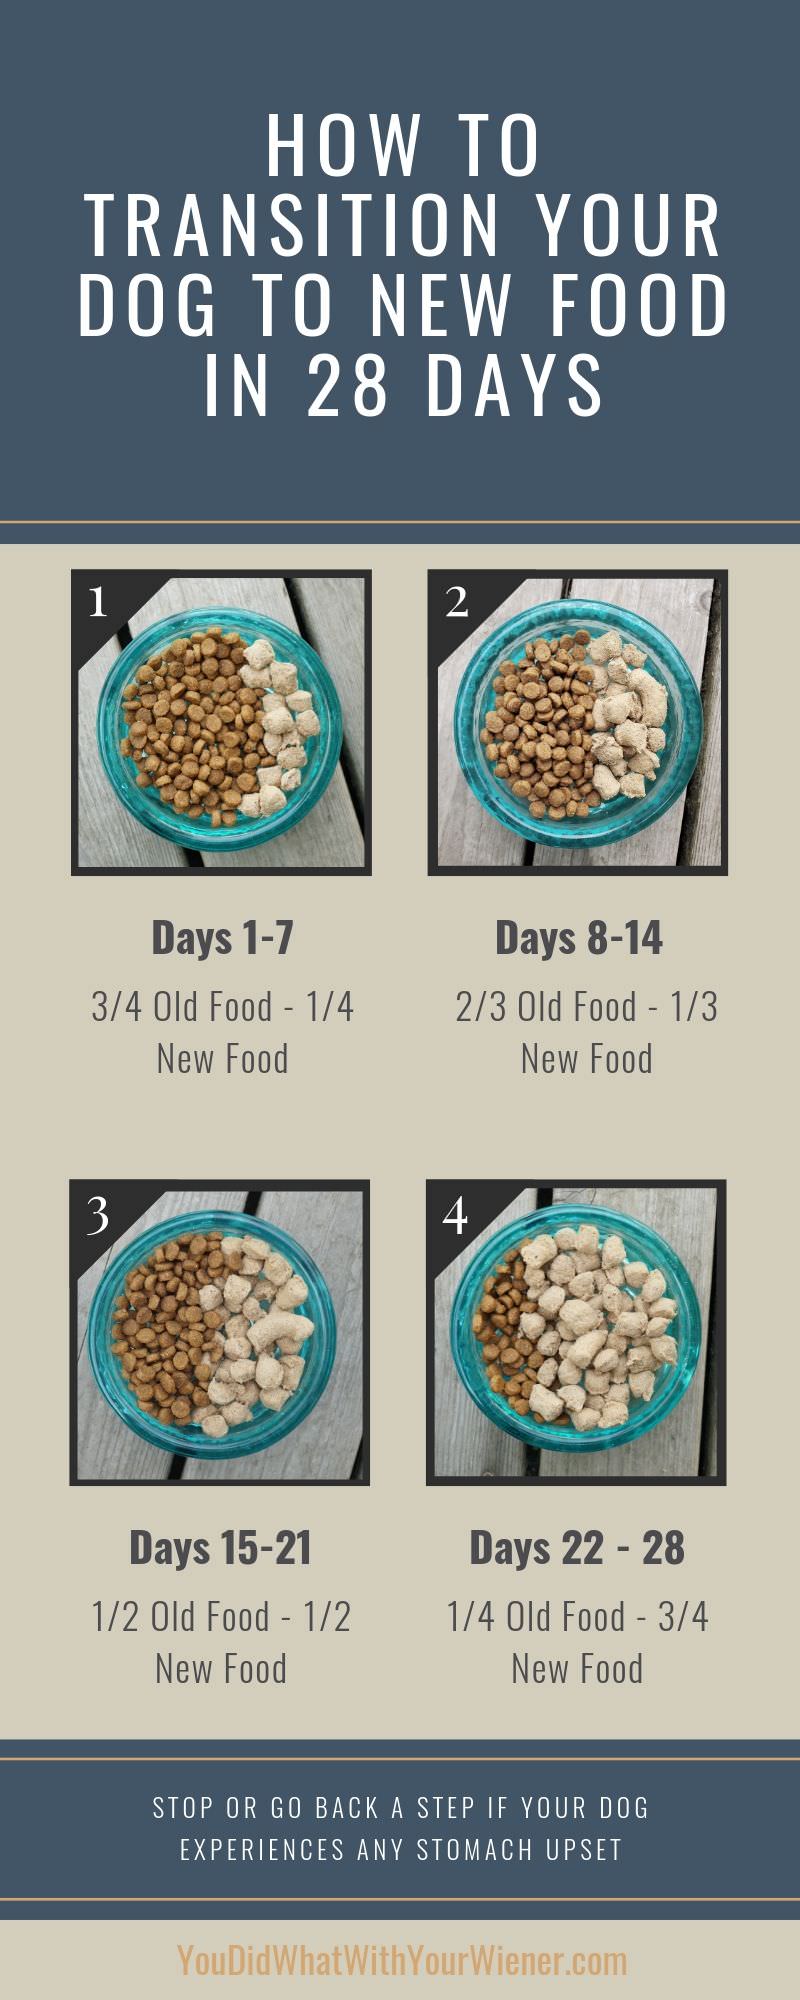 Graphic showing images of the 4 steps process of transitioning a dog to a new food (ratios over time)